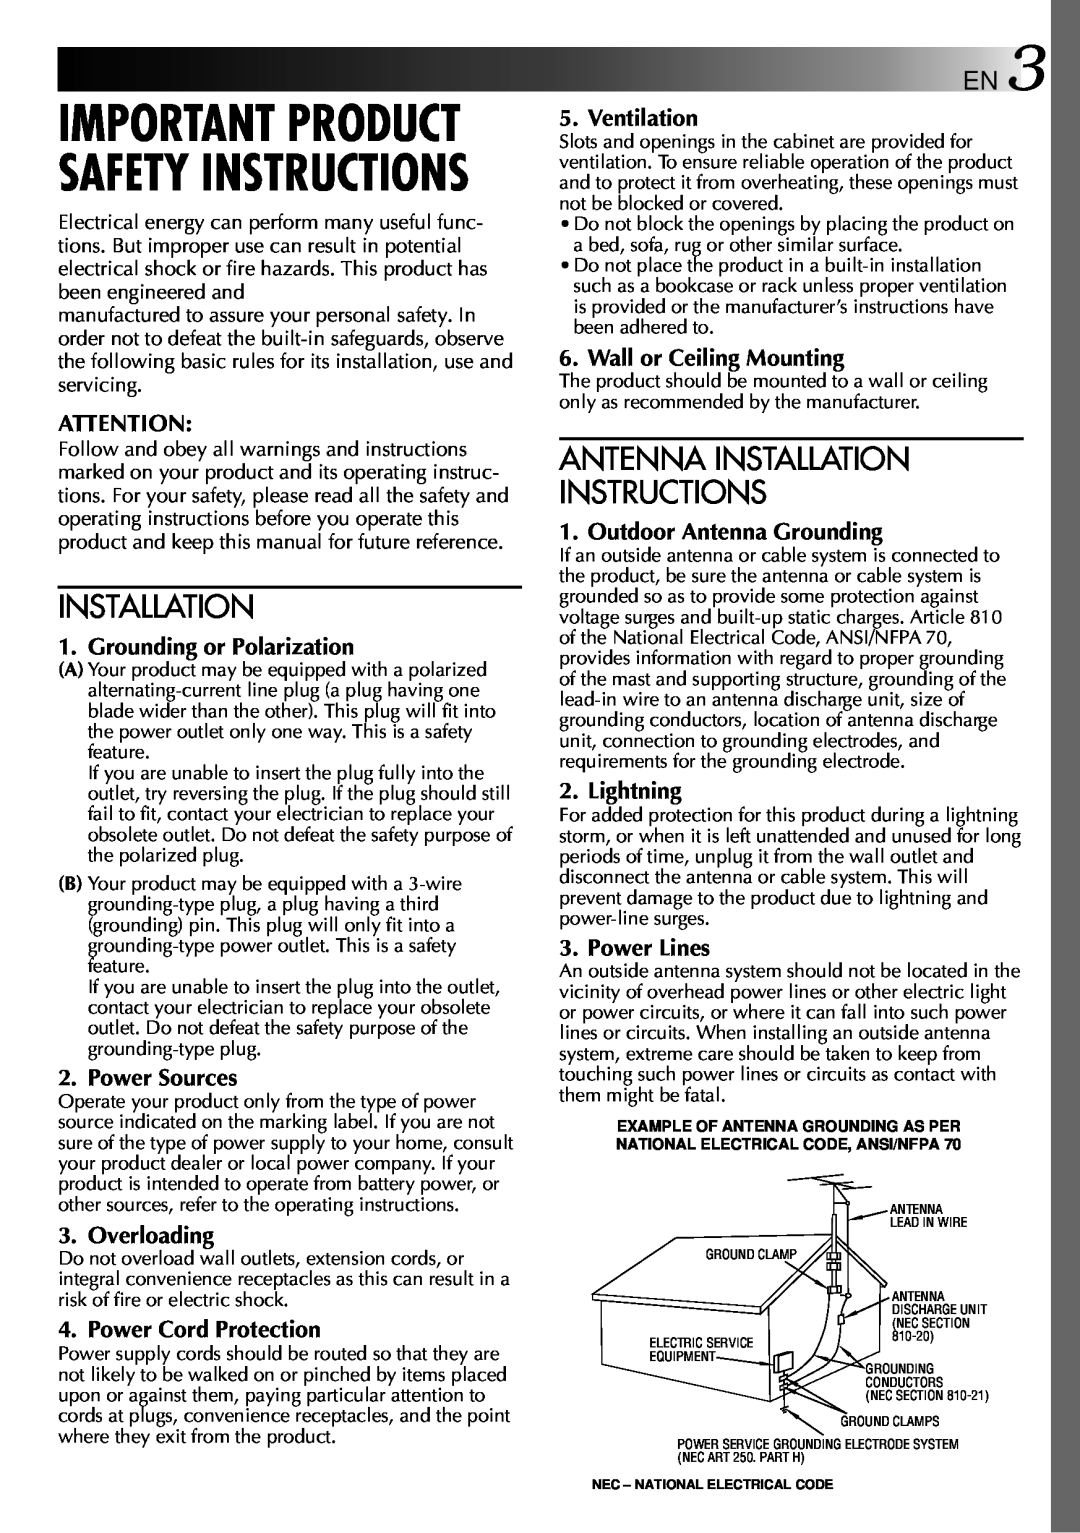 JVC GR-AXM70 manual Antenna Installation Instructions, Important Product Safety Instructions, Grounding or Polarization 